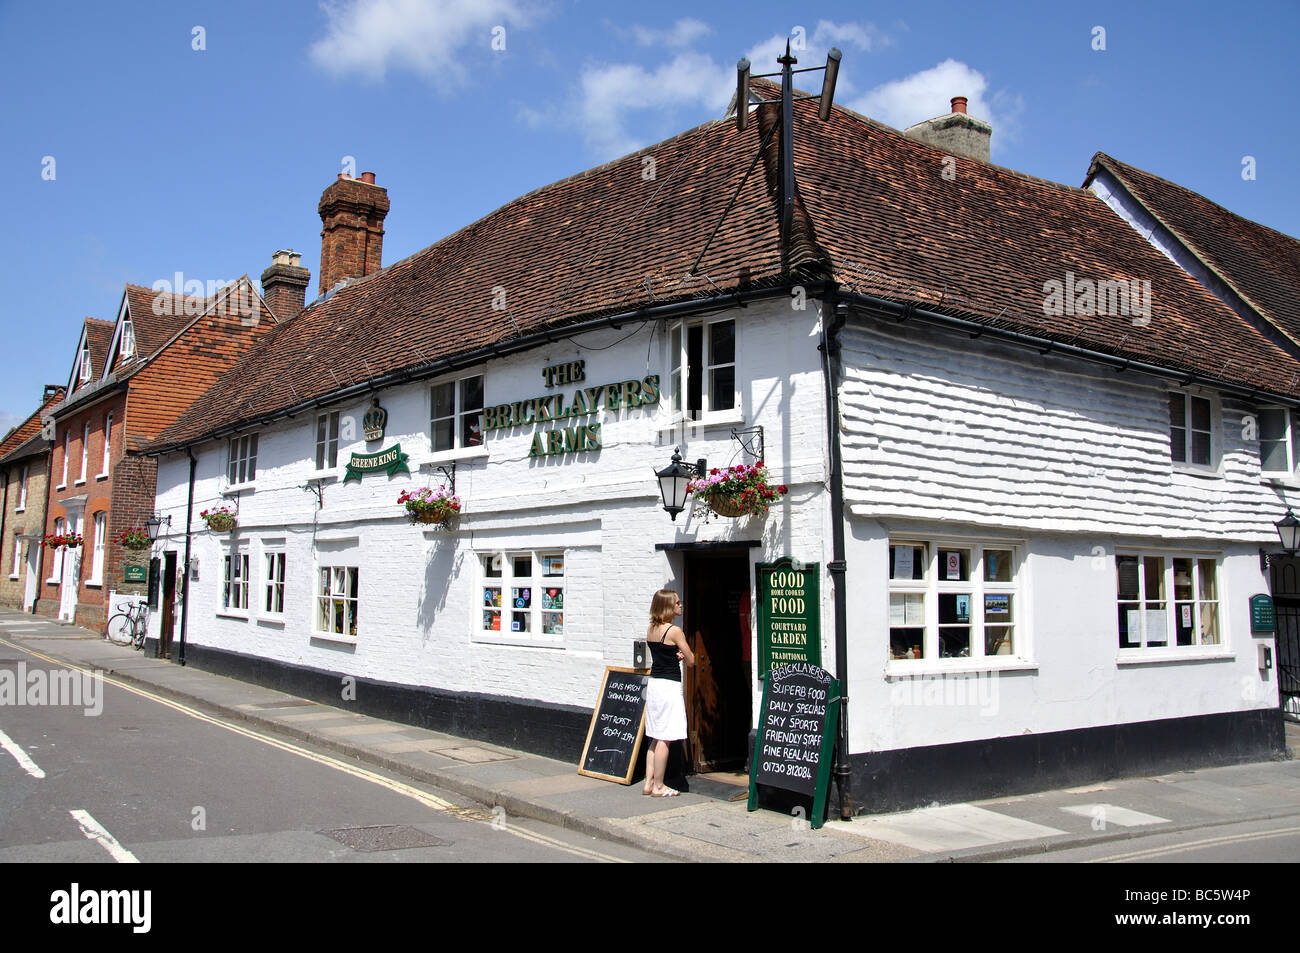 The Bricklayers Arms, Wool Lane, Midhurst, West Sussex, England, United Kingdom Stock Photo